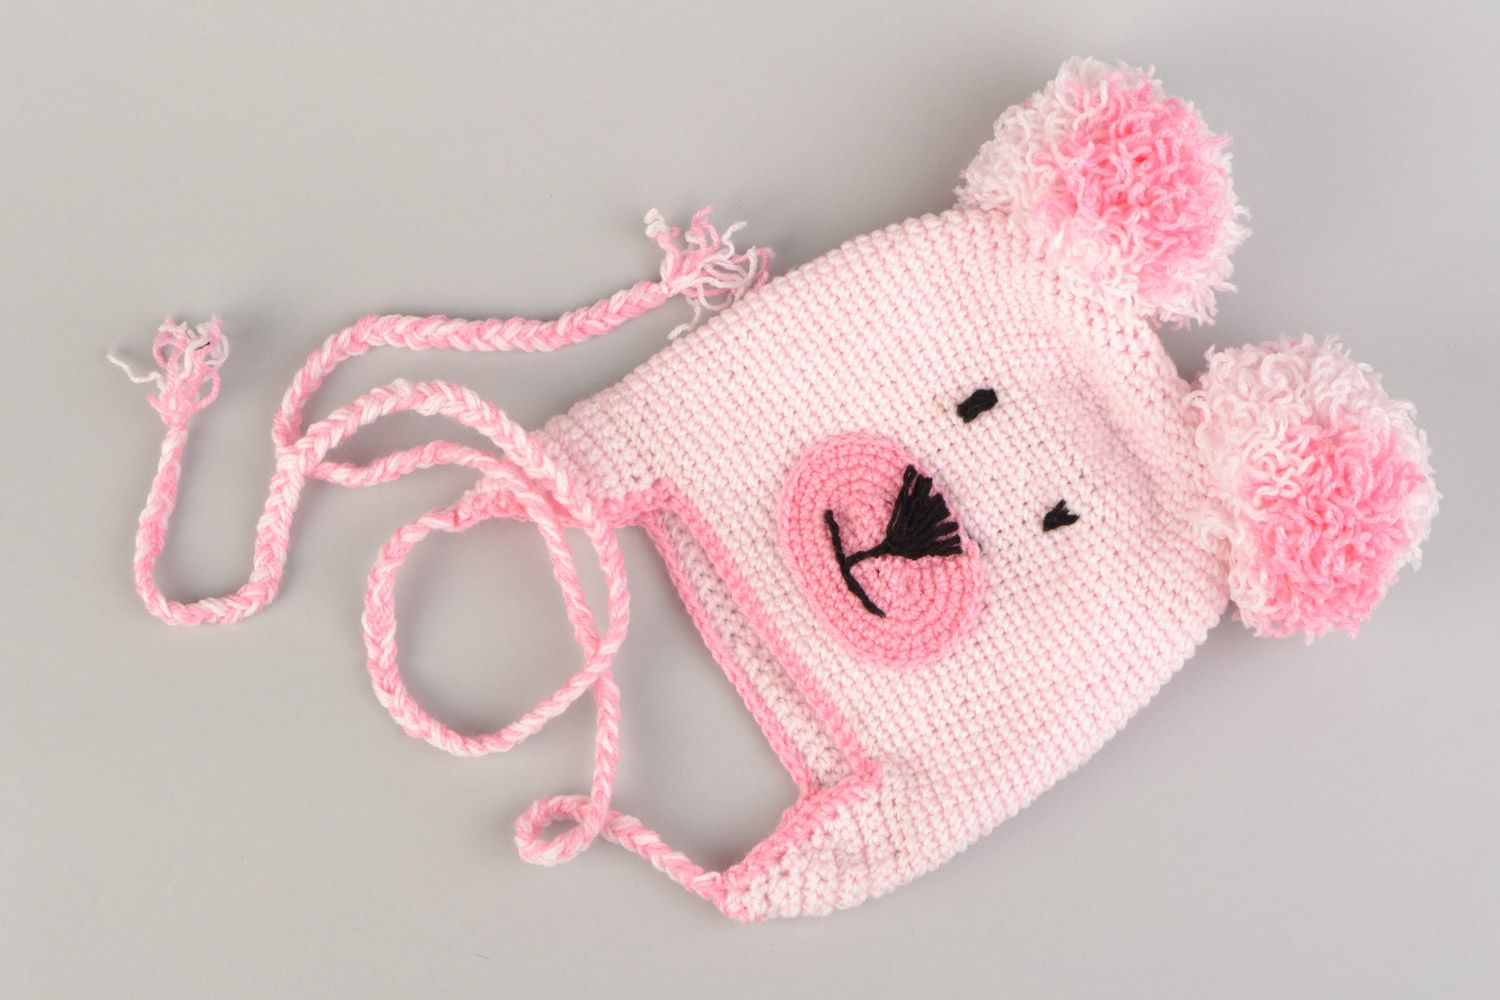 Handmade hat crocheted of hypoallergenic acrylics in the shape of pink bear photo 1